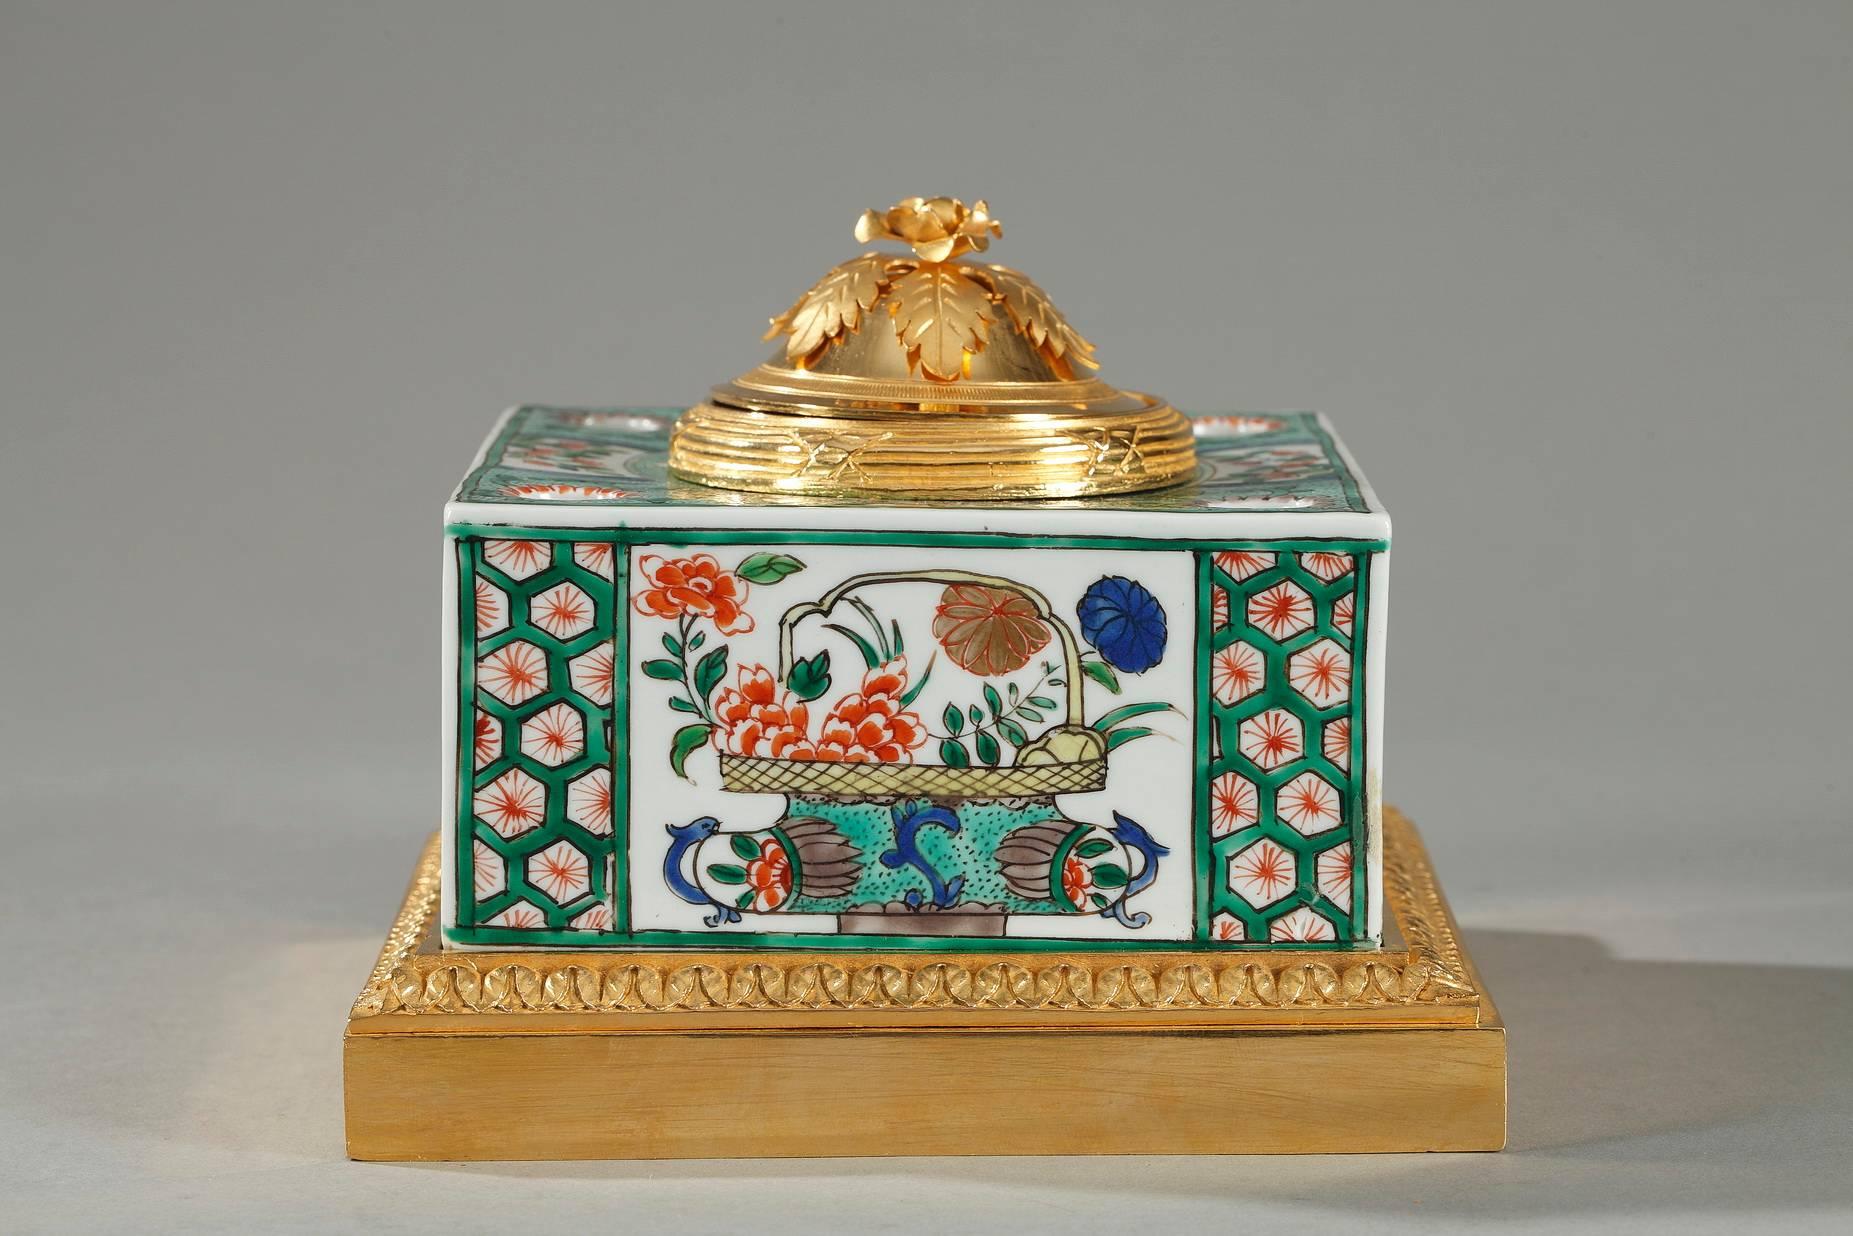 Small famille verte porcelain inkwell decorated with enameled flowerpots, foliage, and stylized rinceaux. The inkwell is set on a gilt bronze base that is decorated with palmette and bands embellished with interspaced latticework encircle the